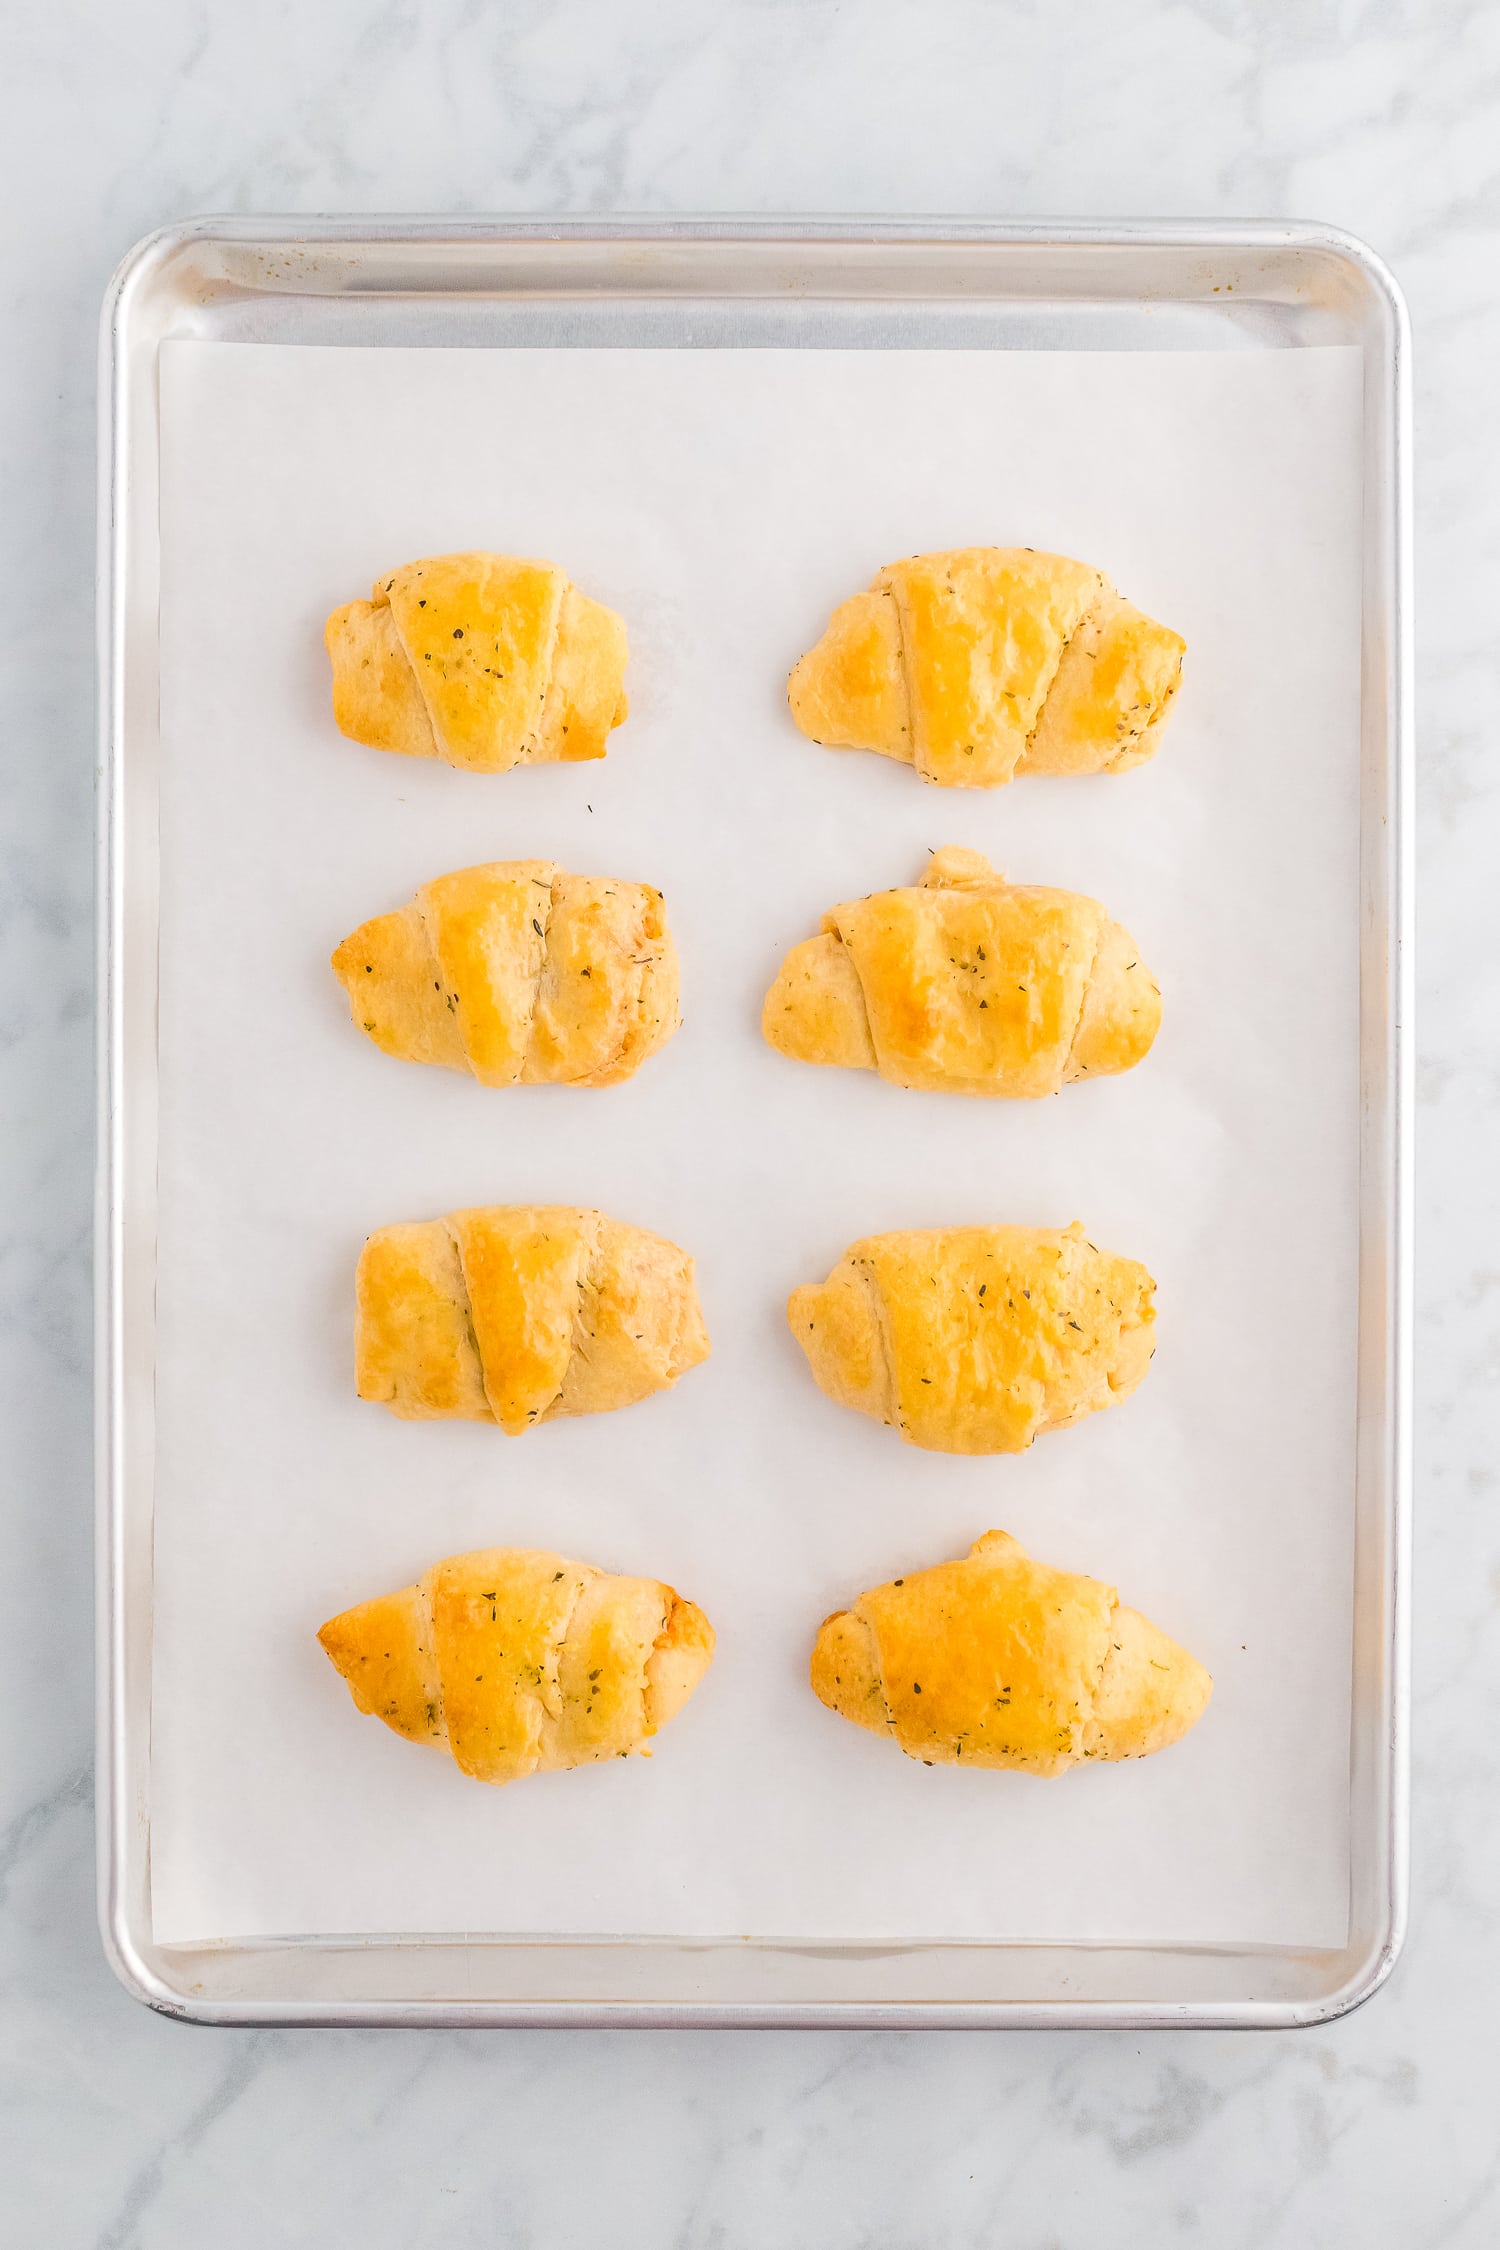 BAked Pizza Crescent Rolls on sheet pan